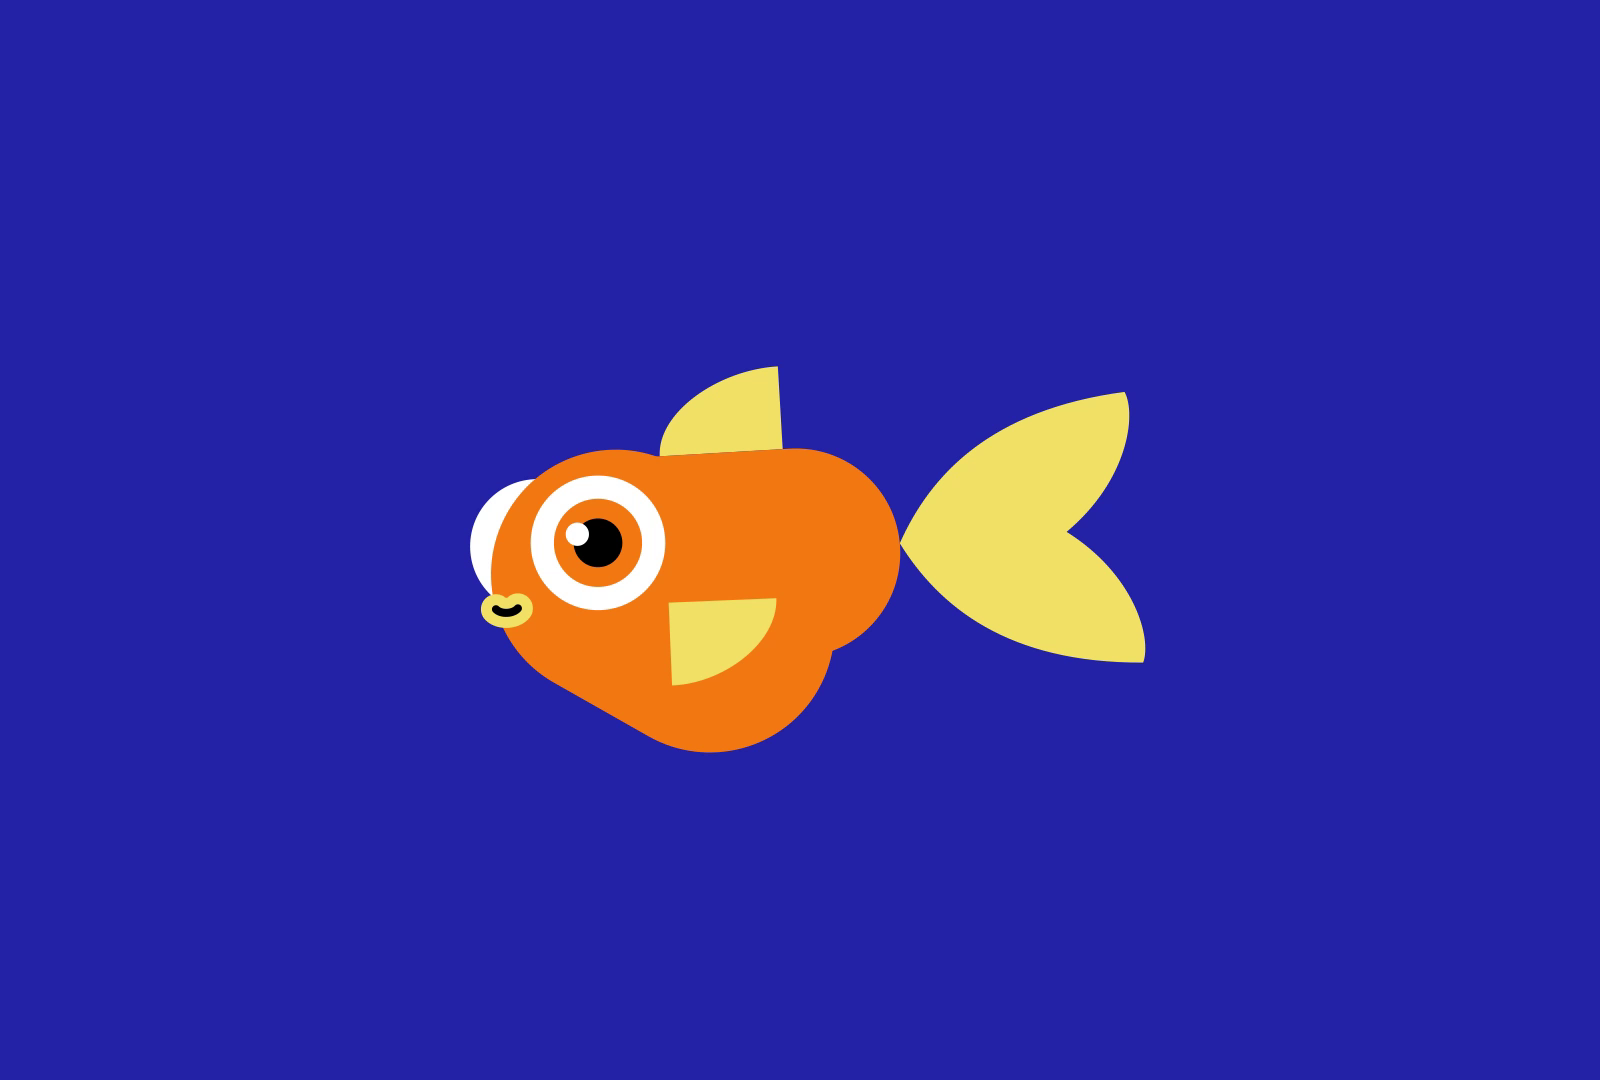 Fish motion design by opheliah95 on Dribbble